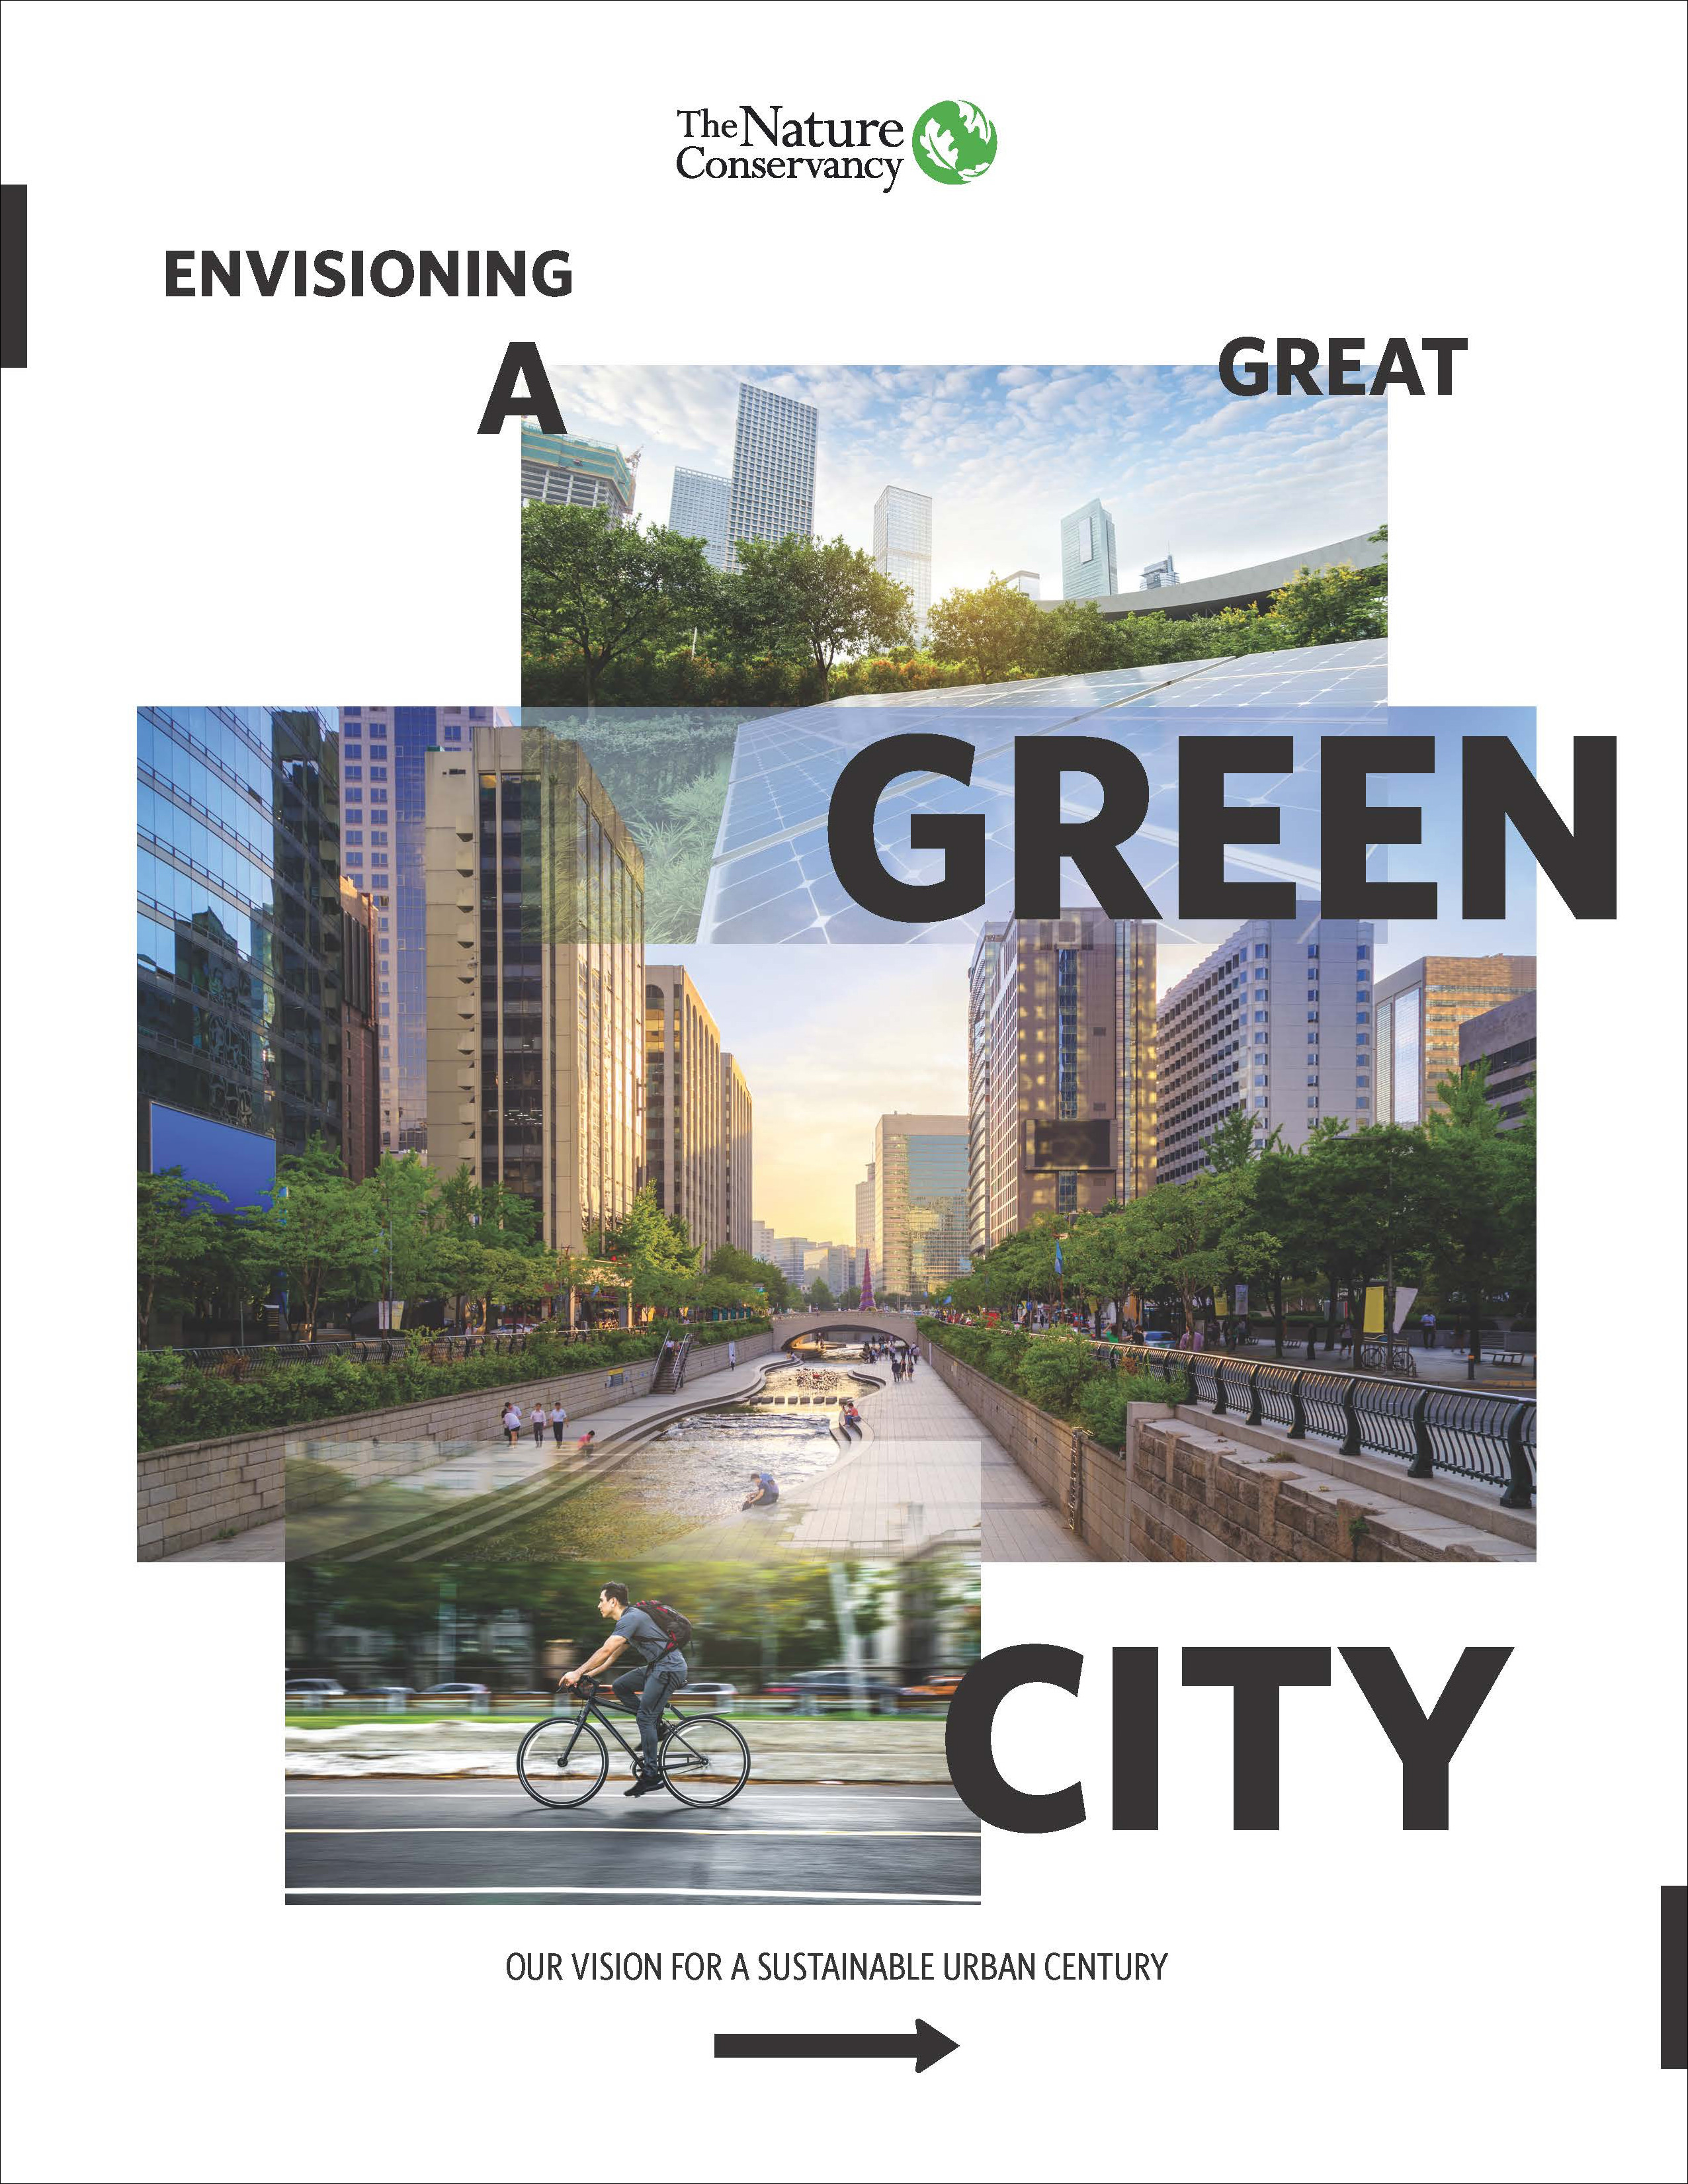 The Nature of Cities, An idea hive of green city building